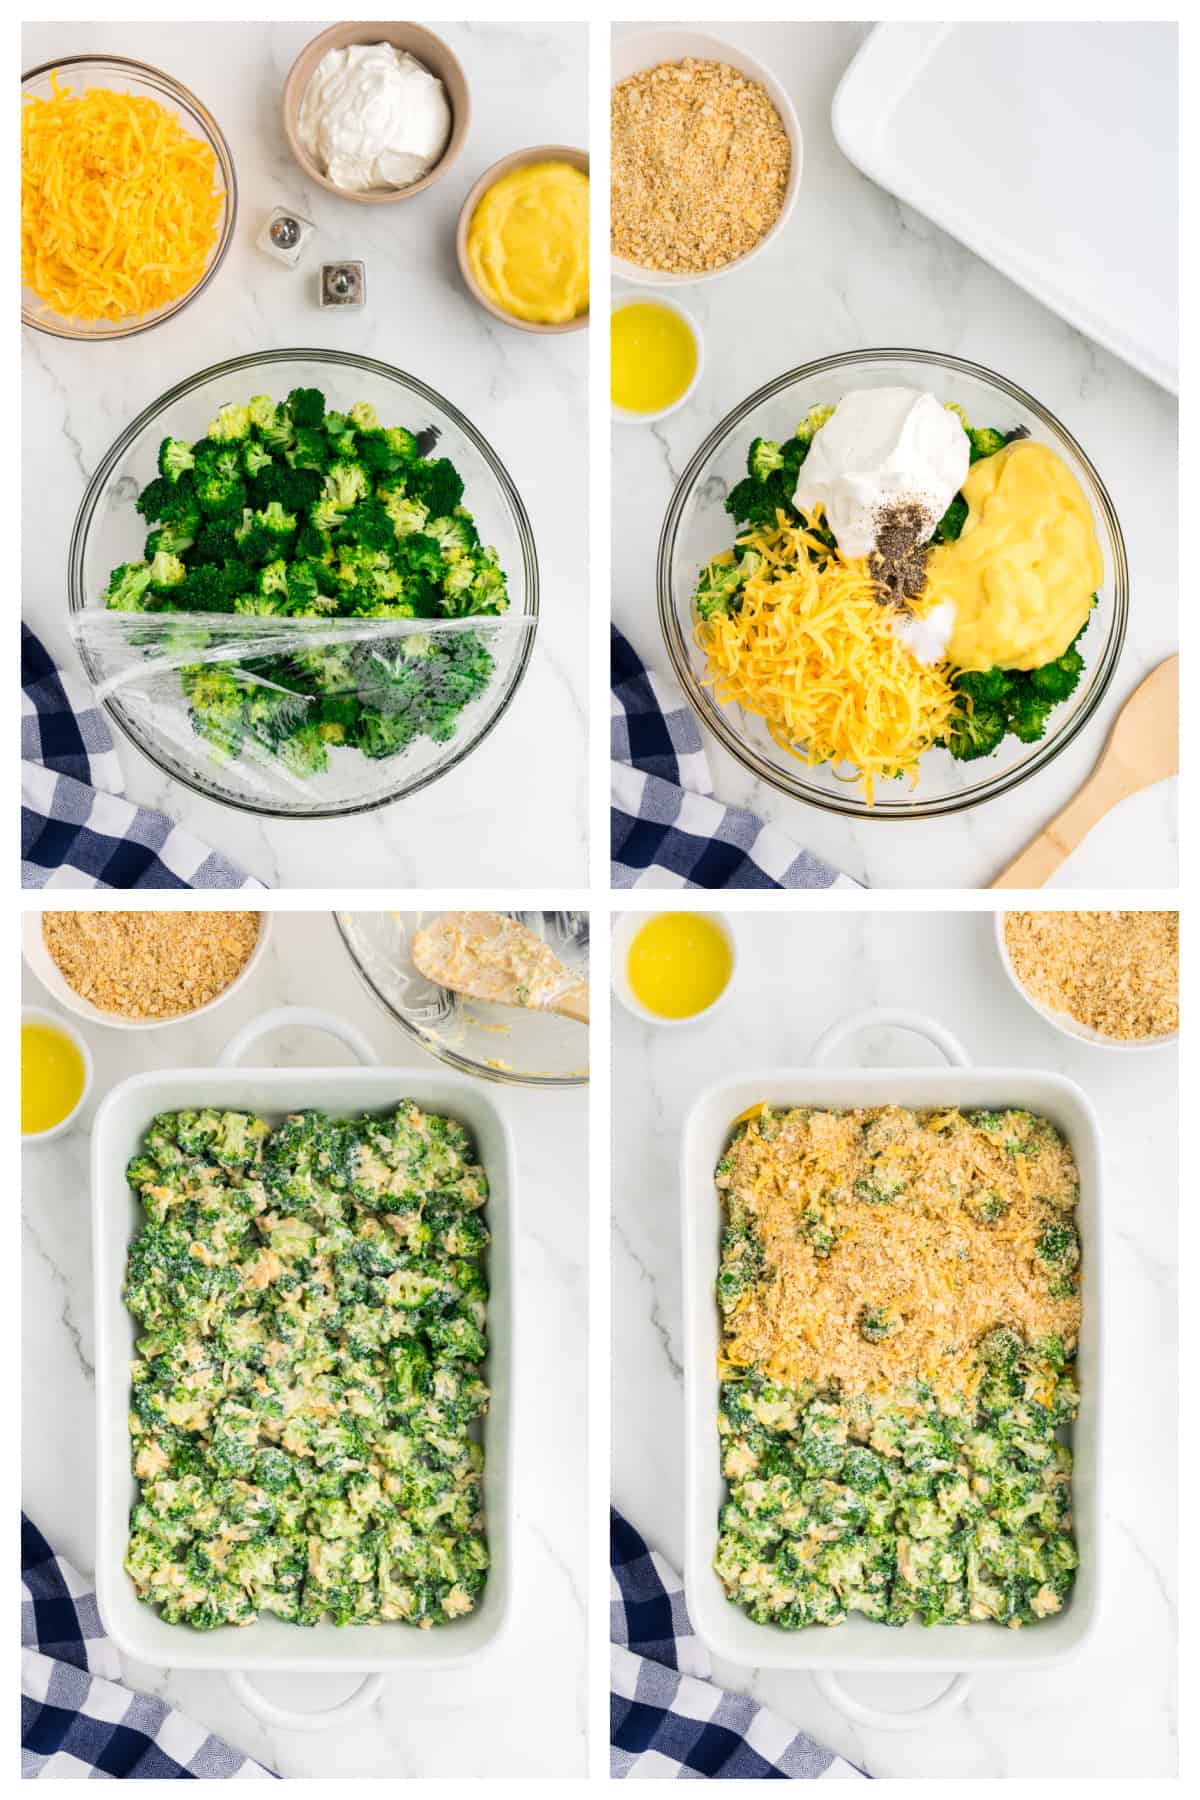 Collage showing how to make broccoli cheese casserole.